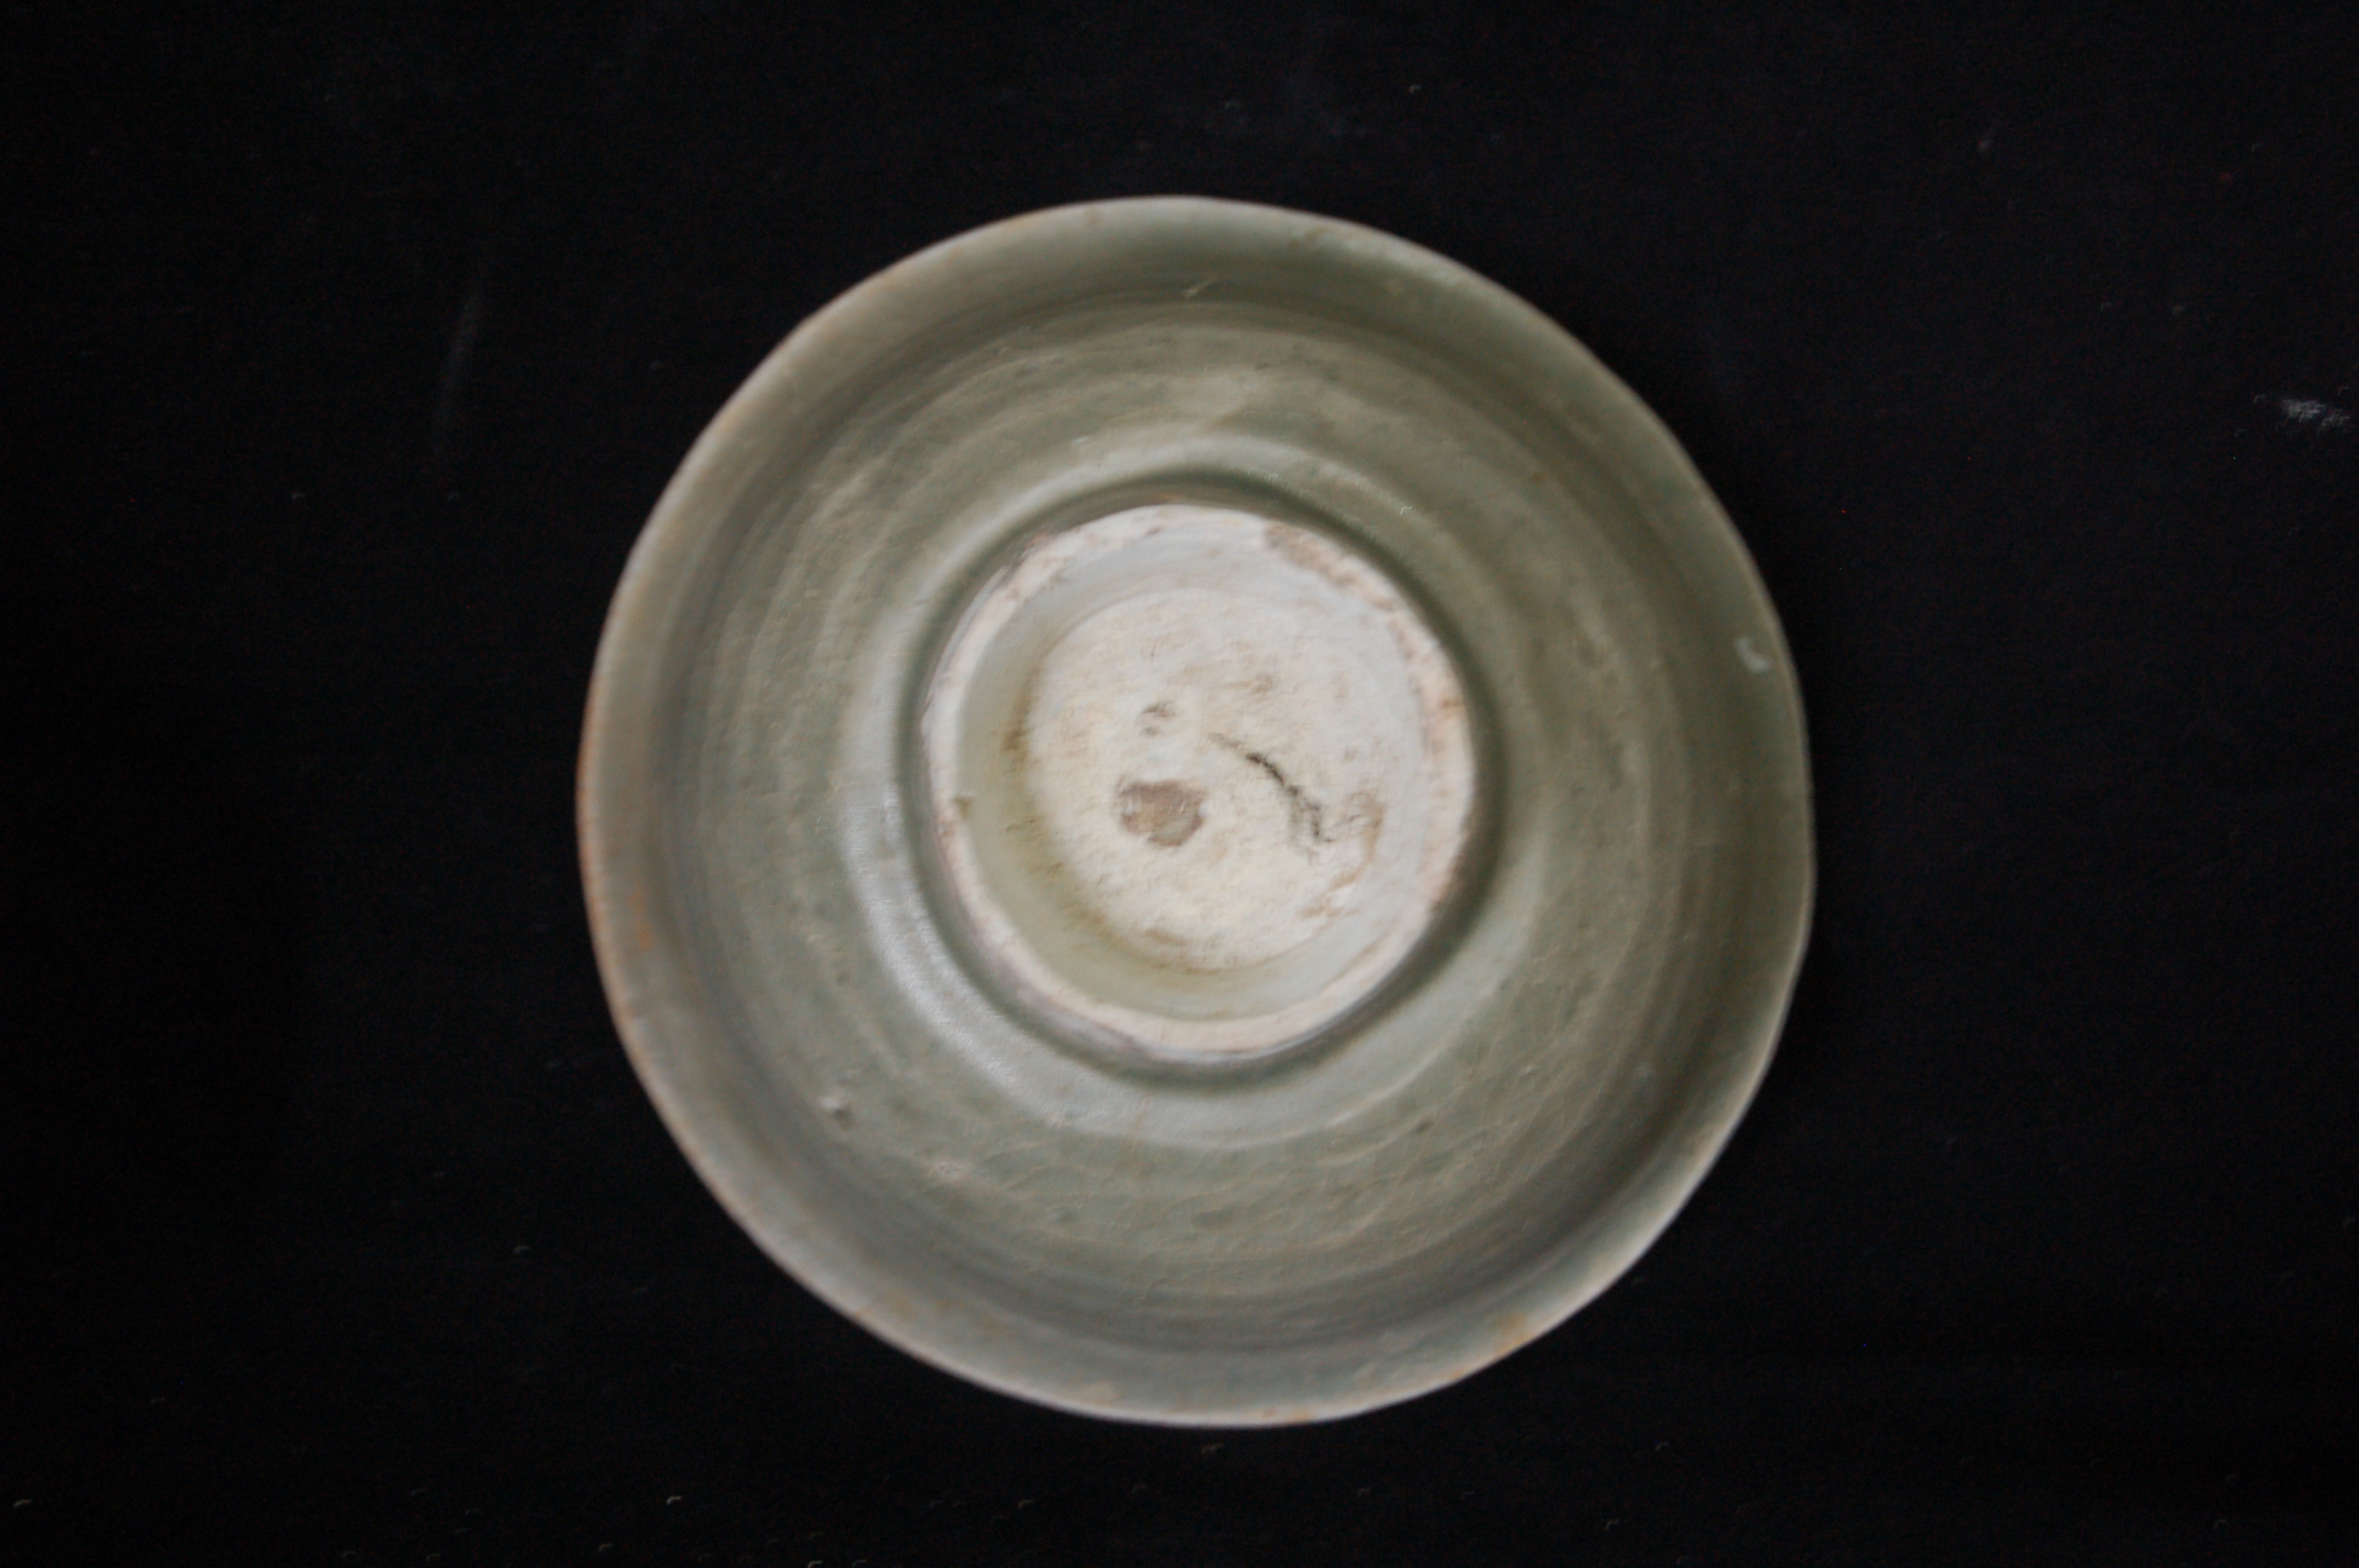 Small bowl with everted rim, rounded wall and high carved foot-ring. Diameter 12 cm, height 6.5 cm.